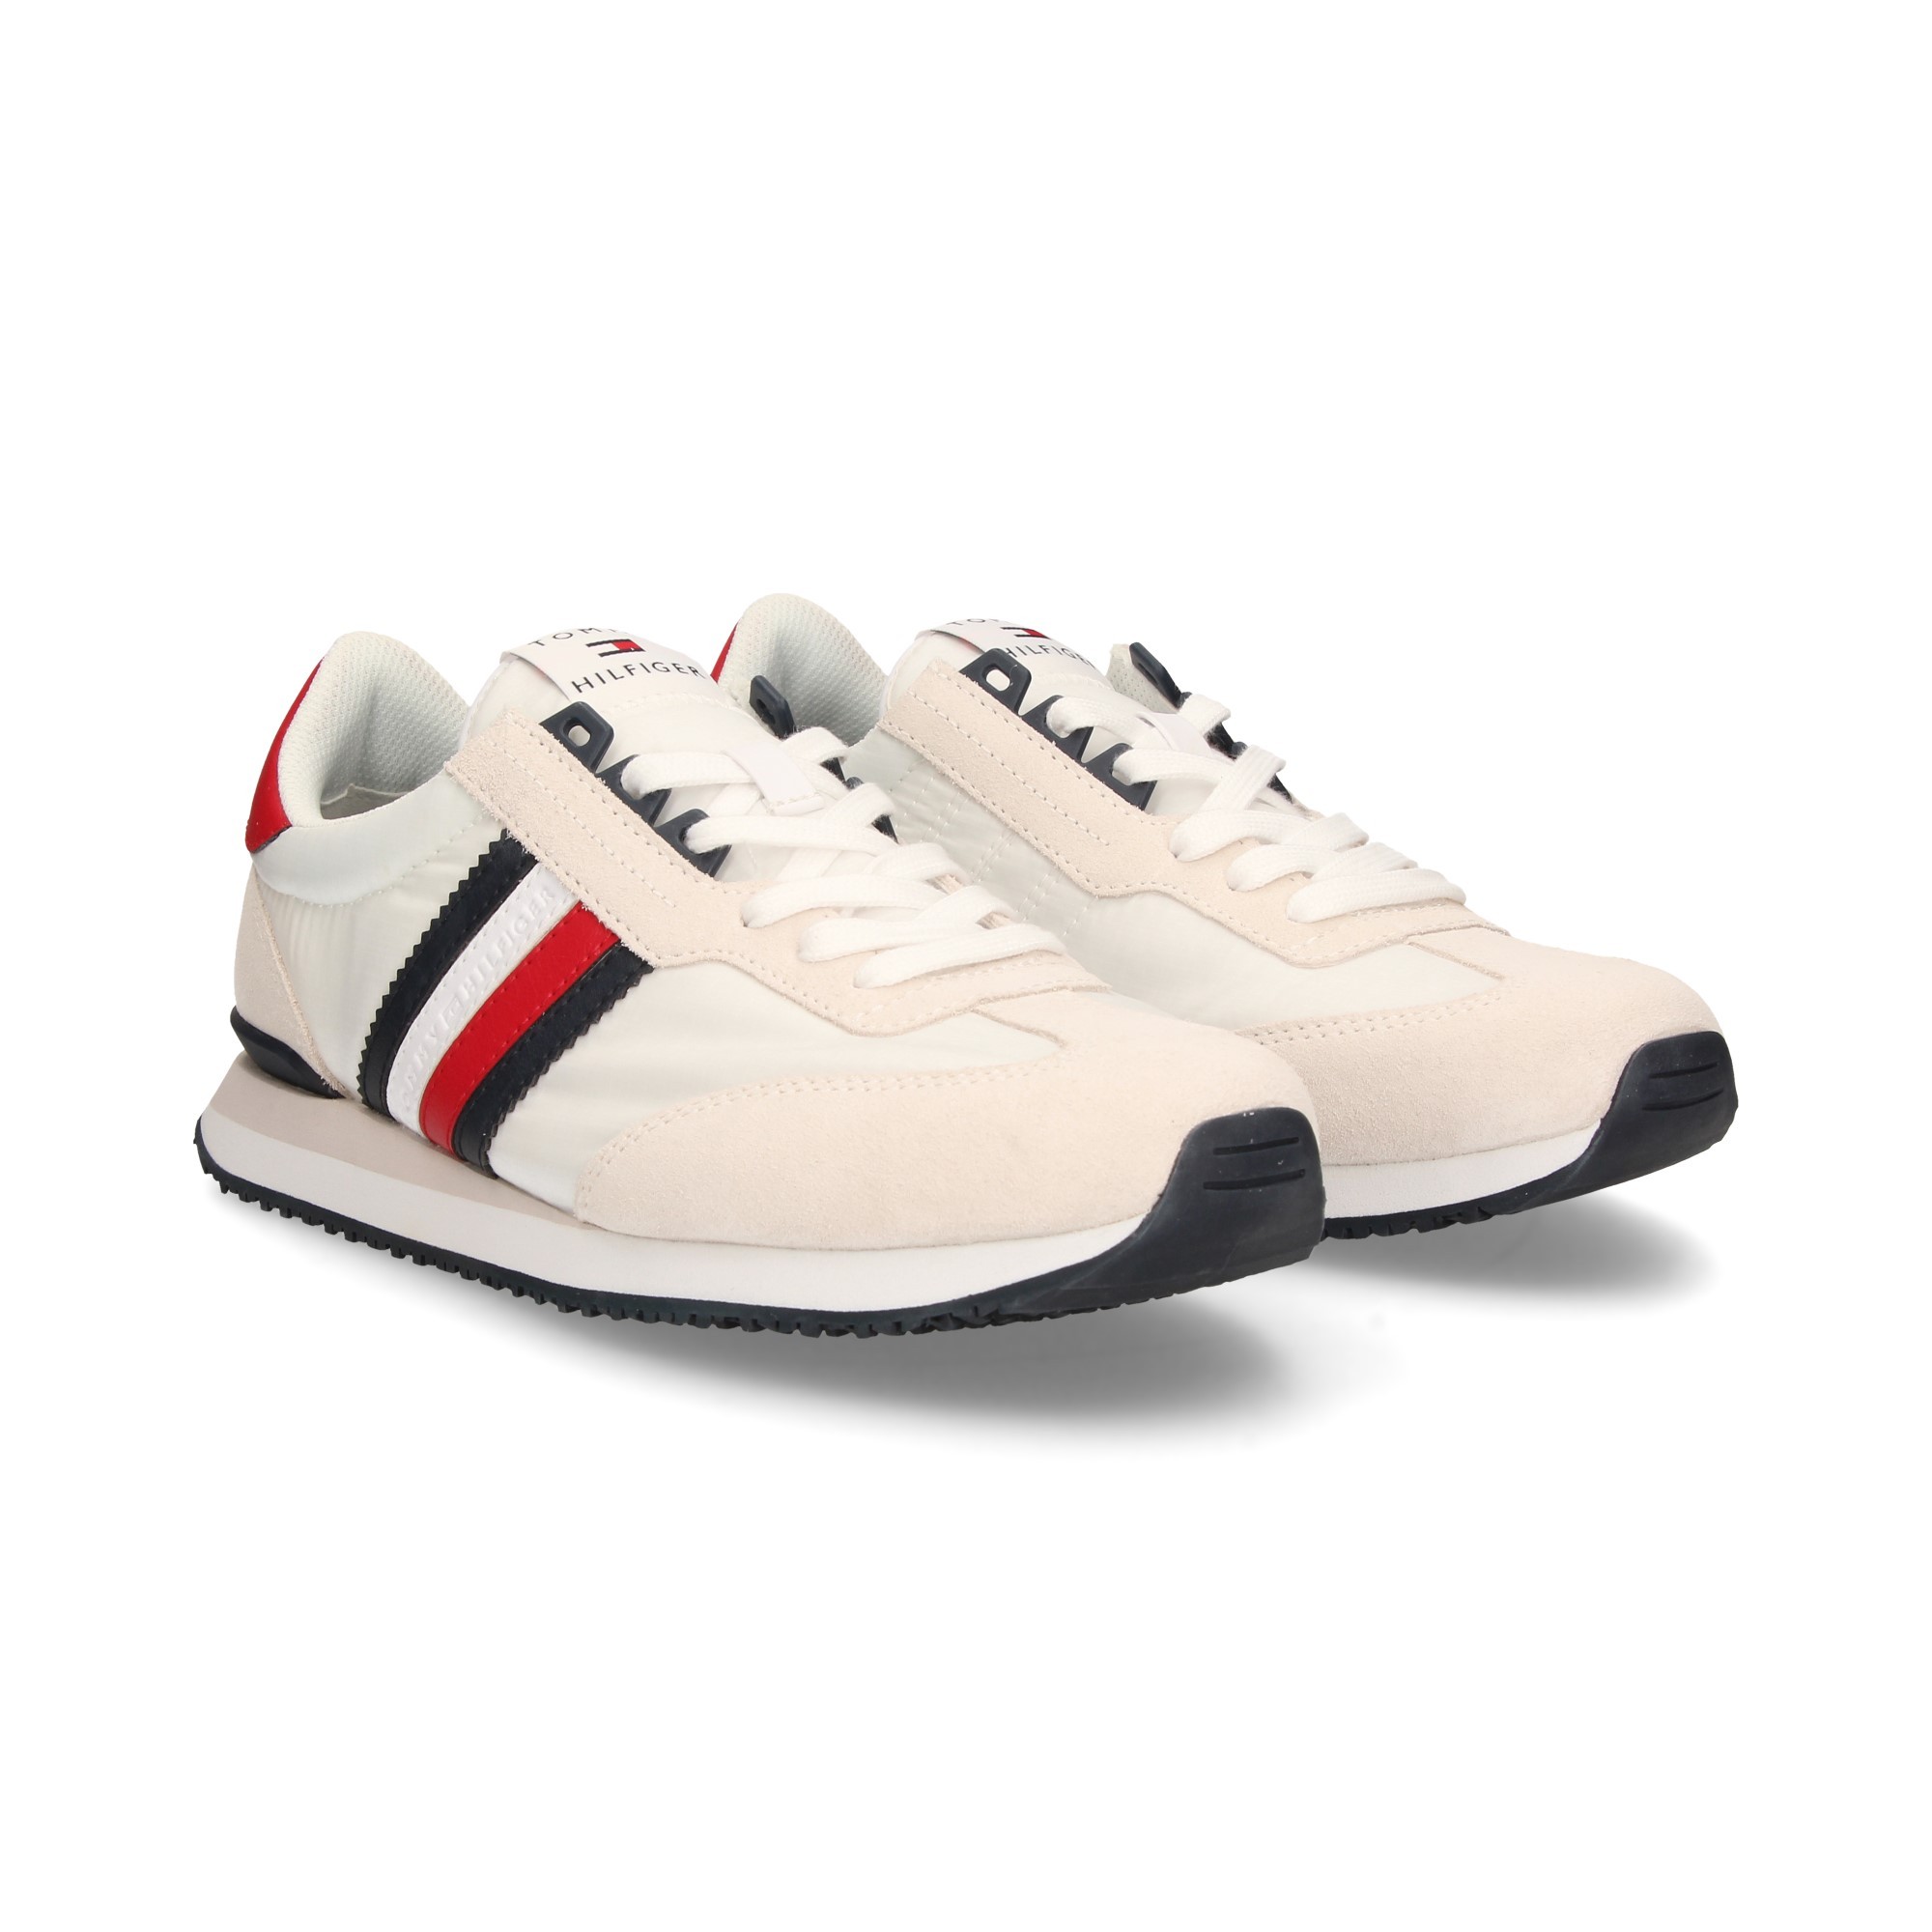 sporty-band-stripes-white-suede